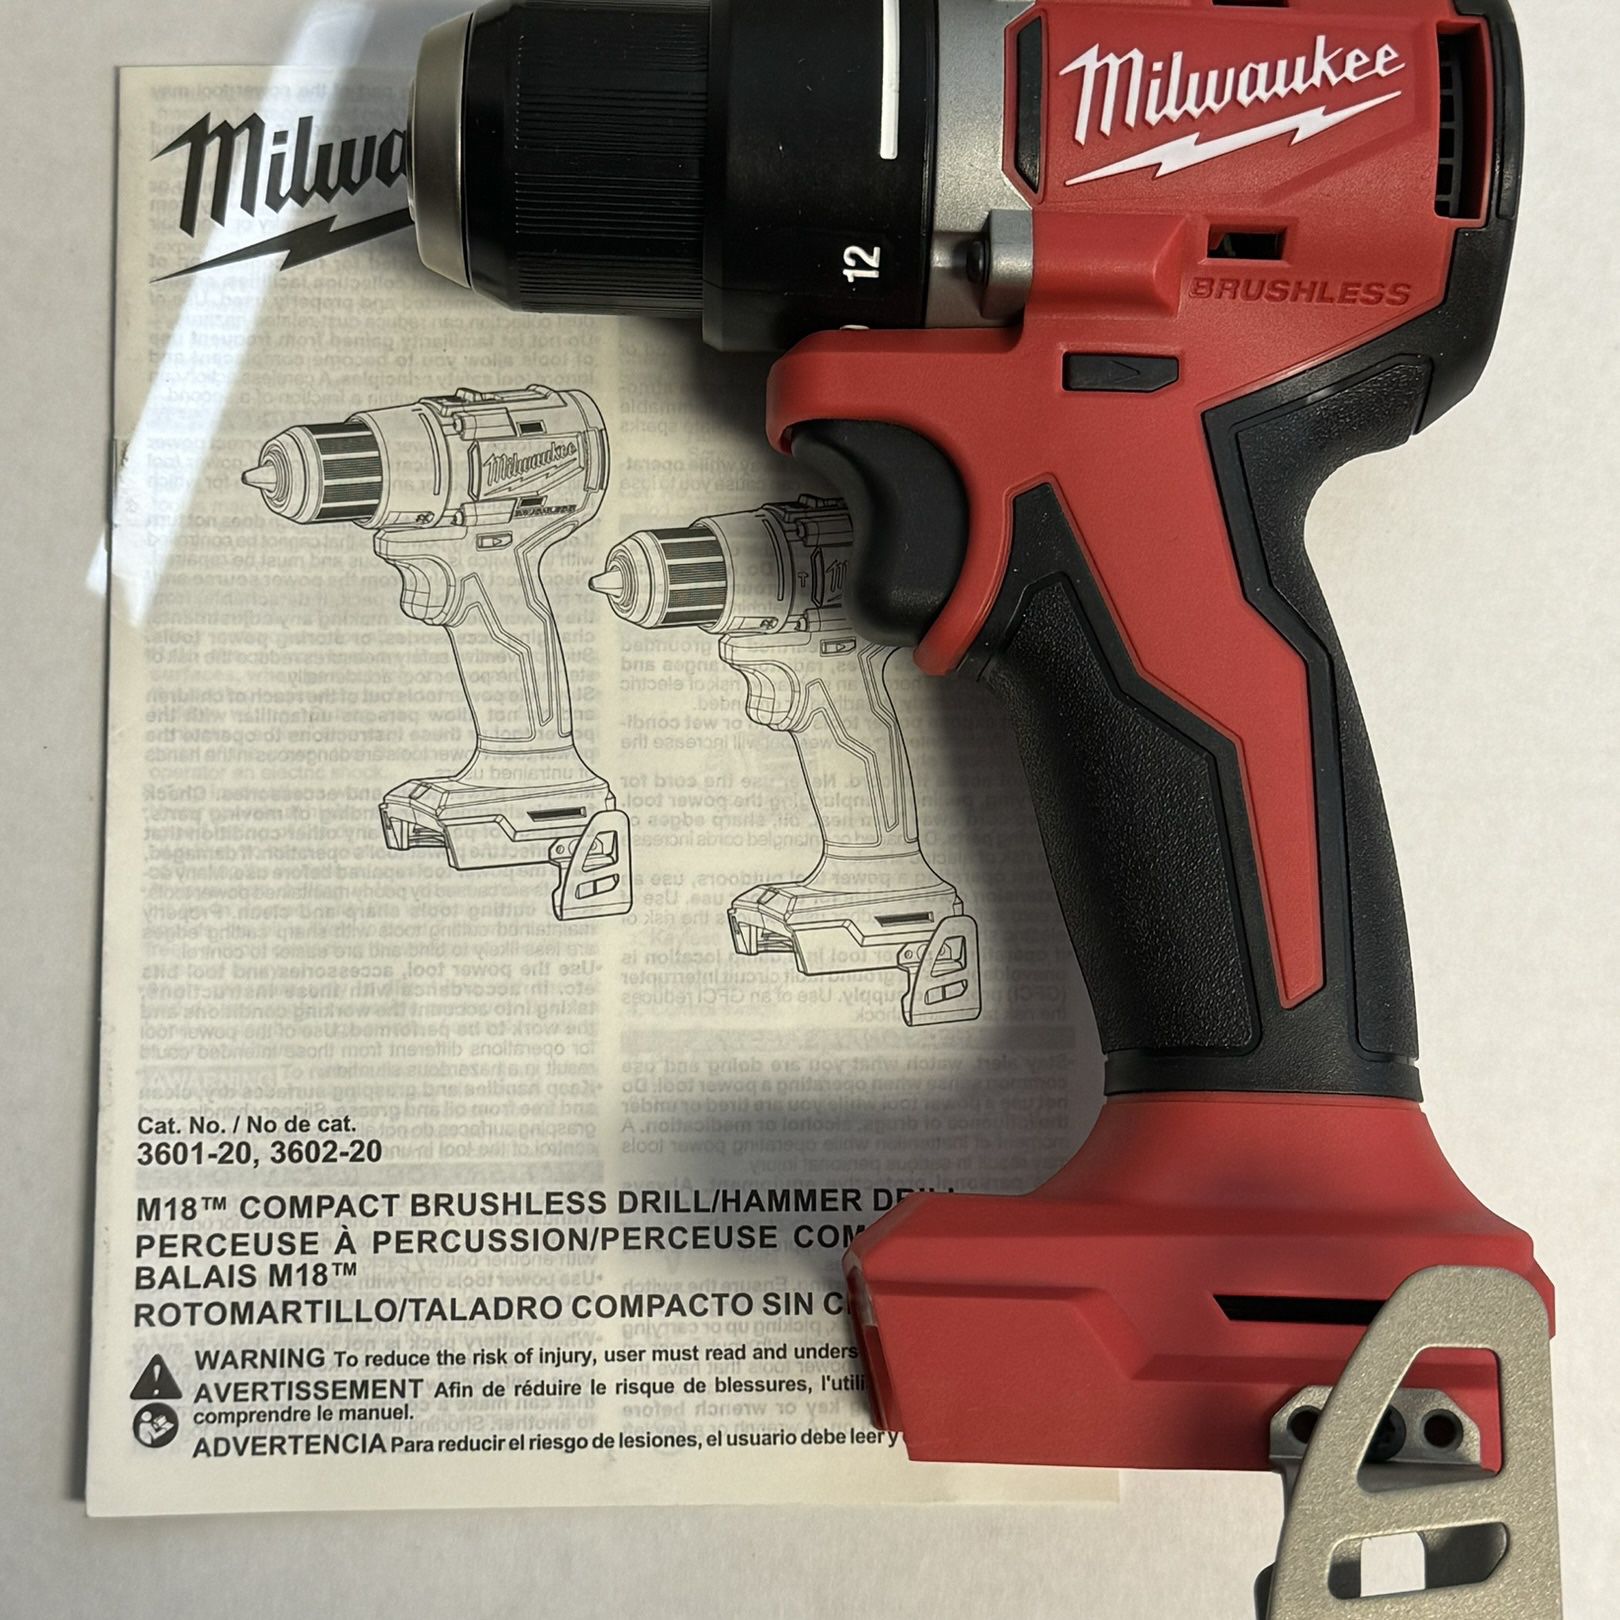 Milwaukee 3601-20 Brushless 1/2” Compact Drill/Driver (Tool Only)